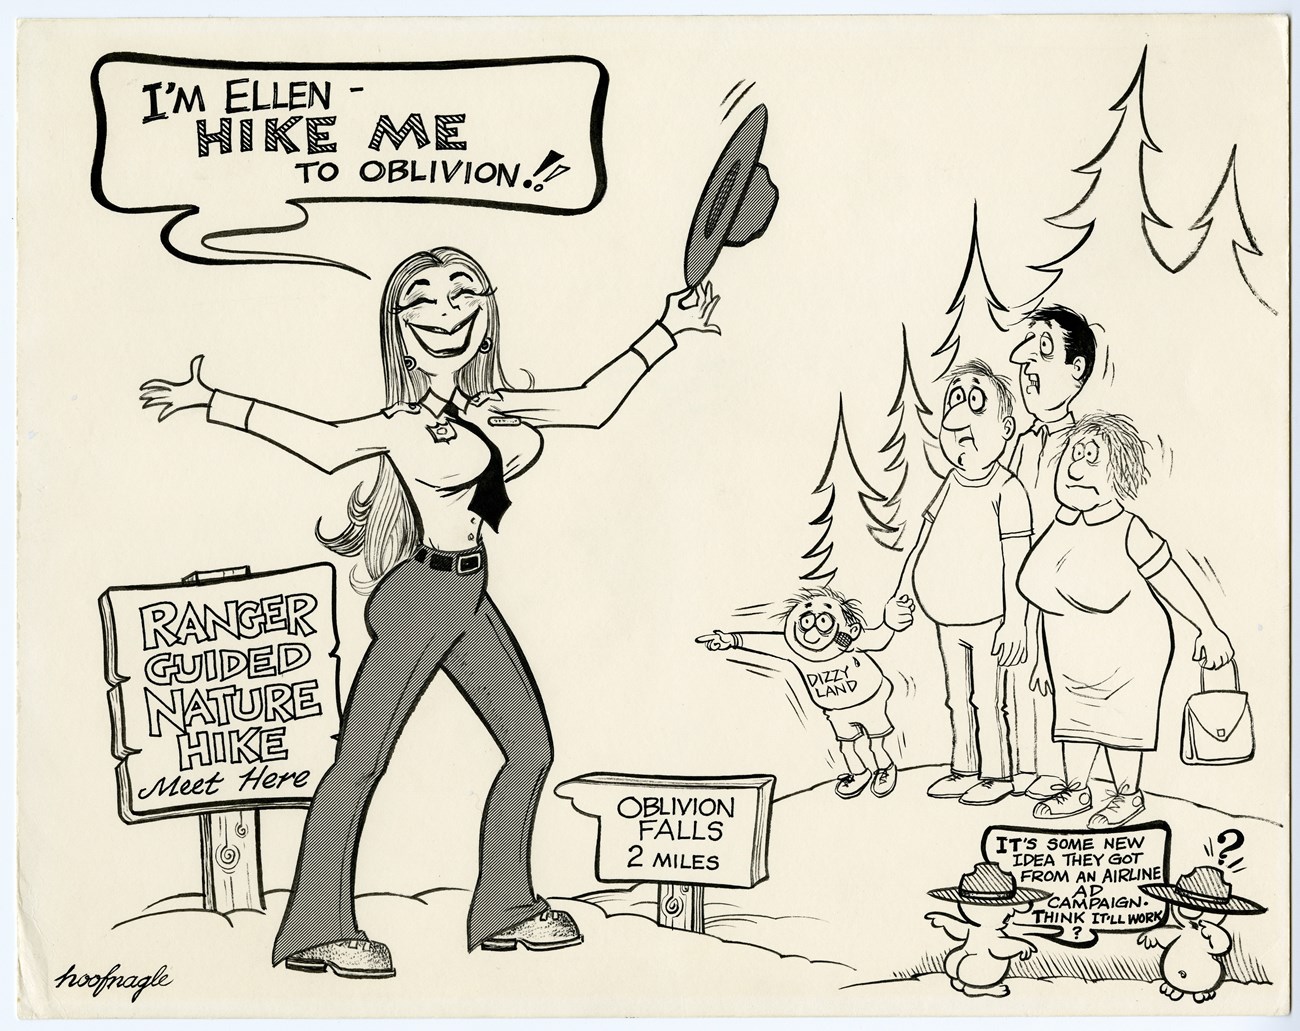 Cartoon of a large-breasted woman ranger saying "I'm Ellen Hike me to Oblivion" to a family standing nearby.